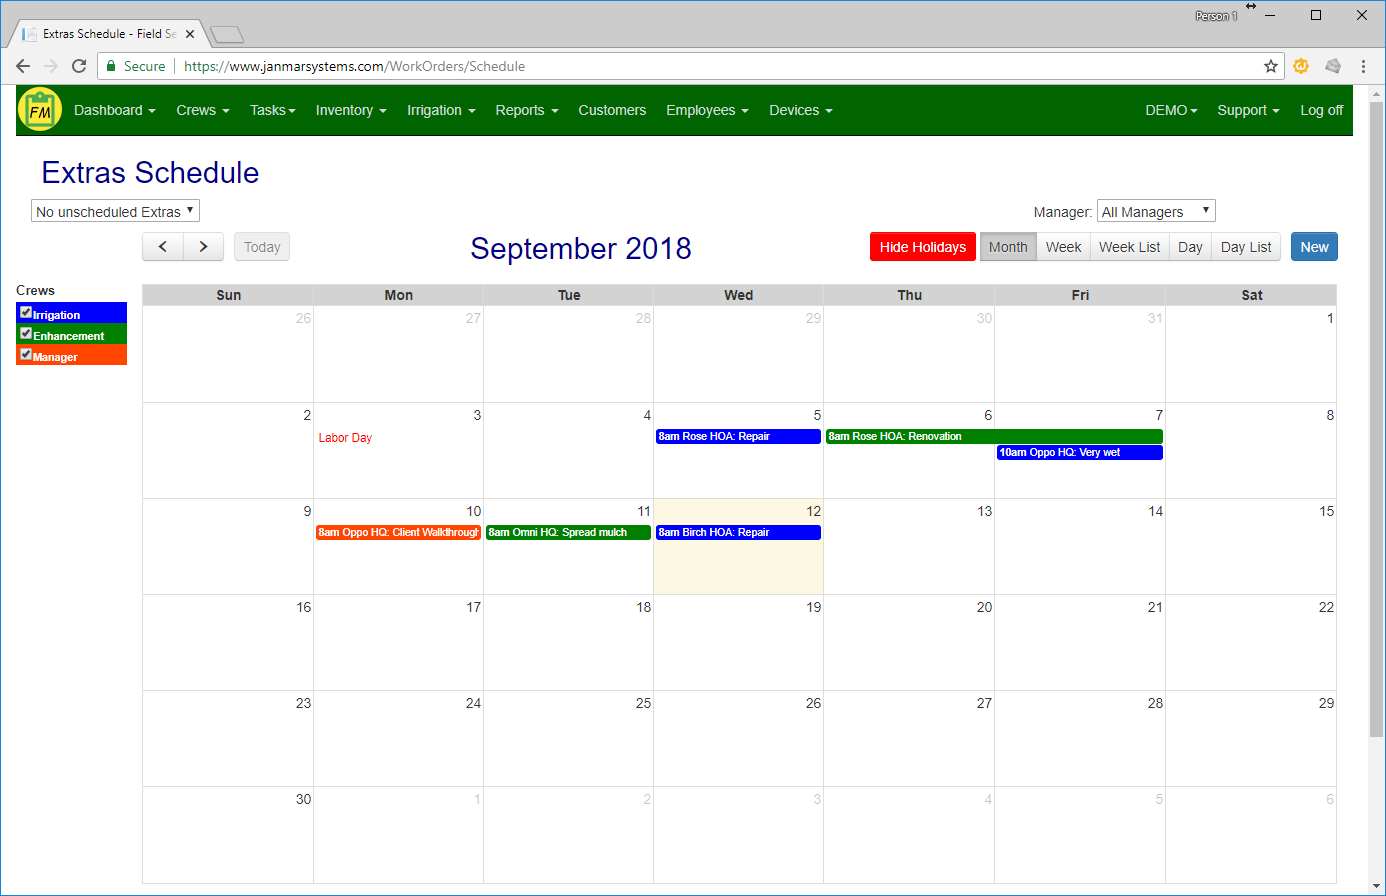 Schedule work orders and issues with drag and drop on a calendar